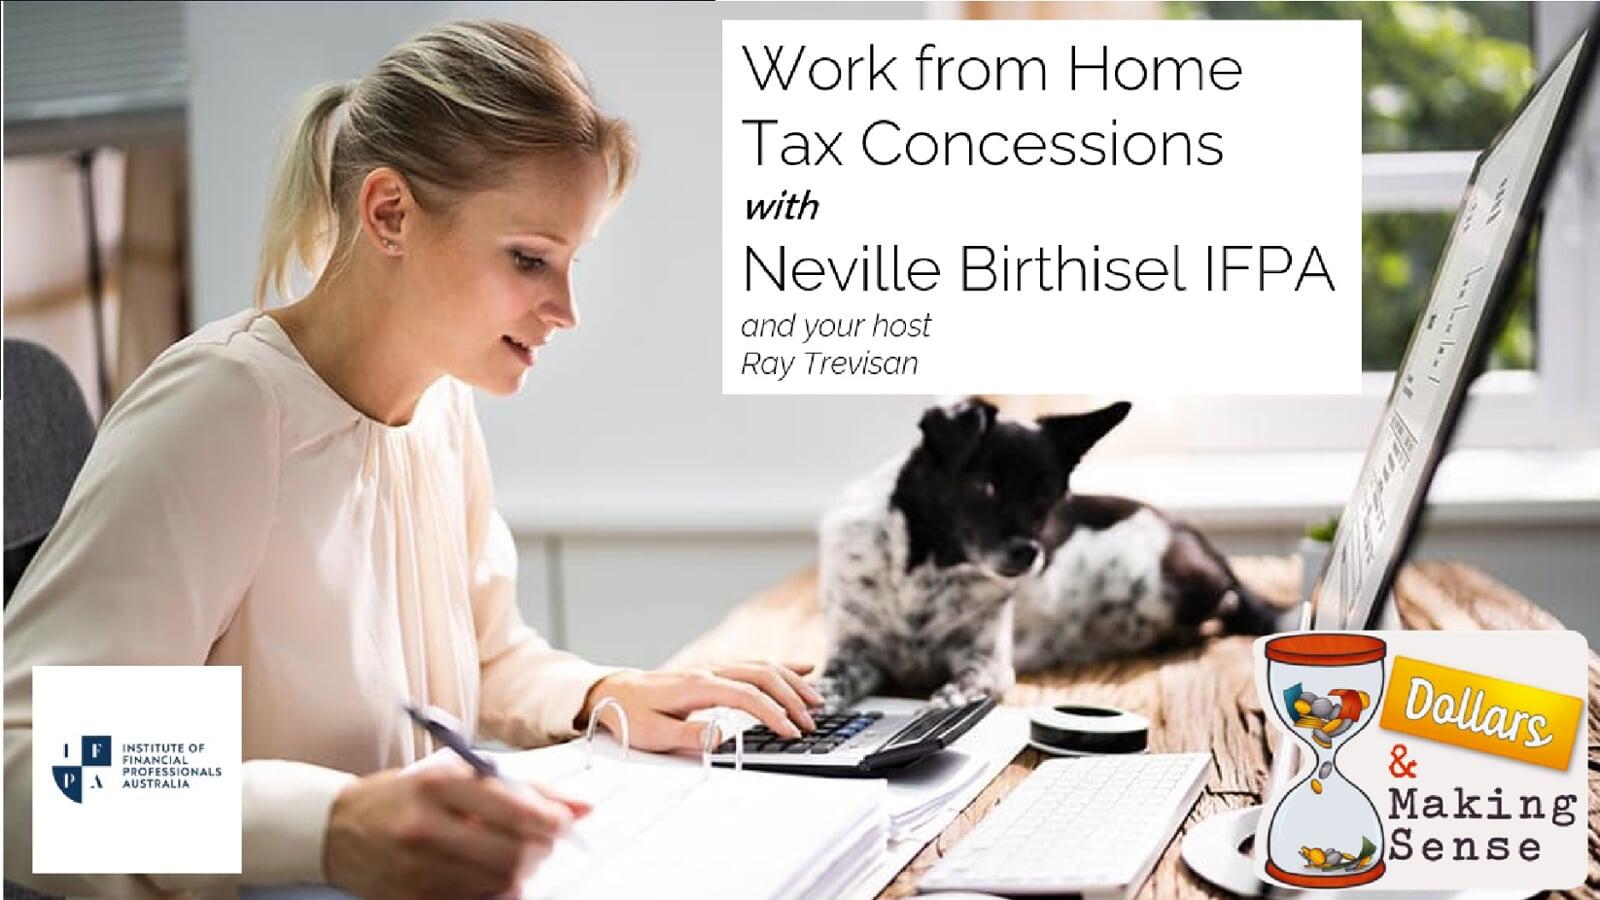 Work from Home Tax Concessions - Dollars & Making Sense 28 Mar 2023